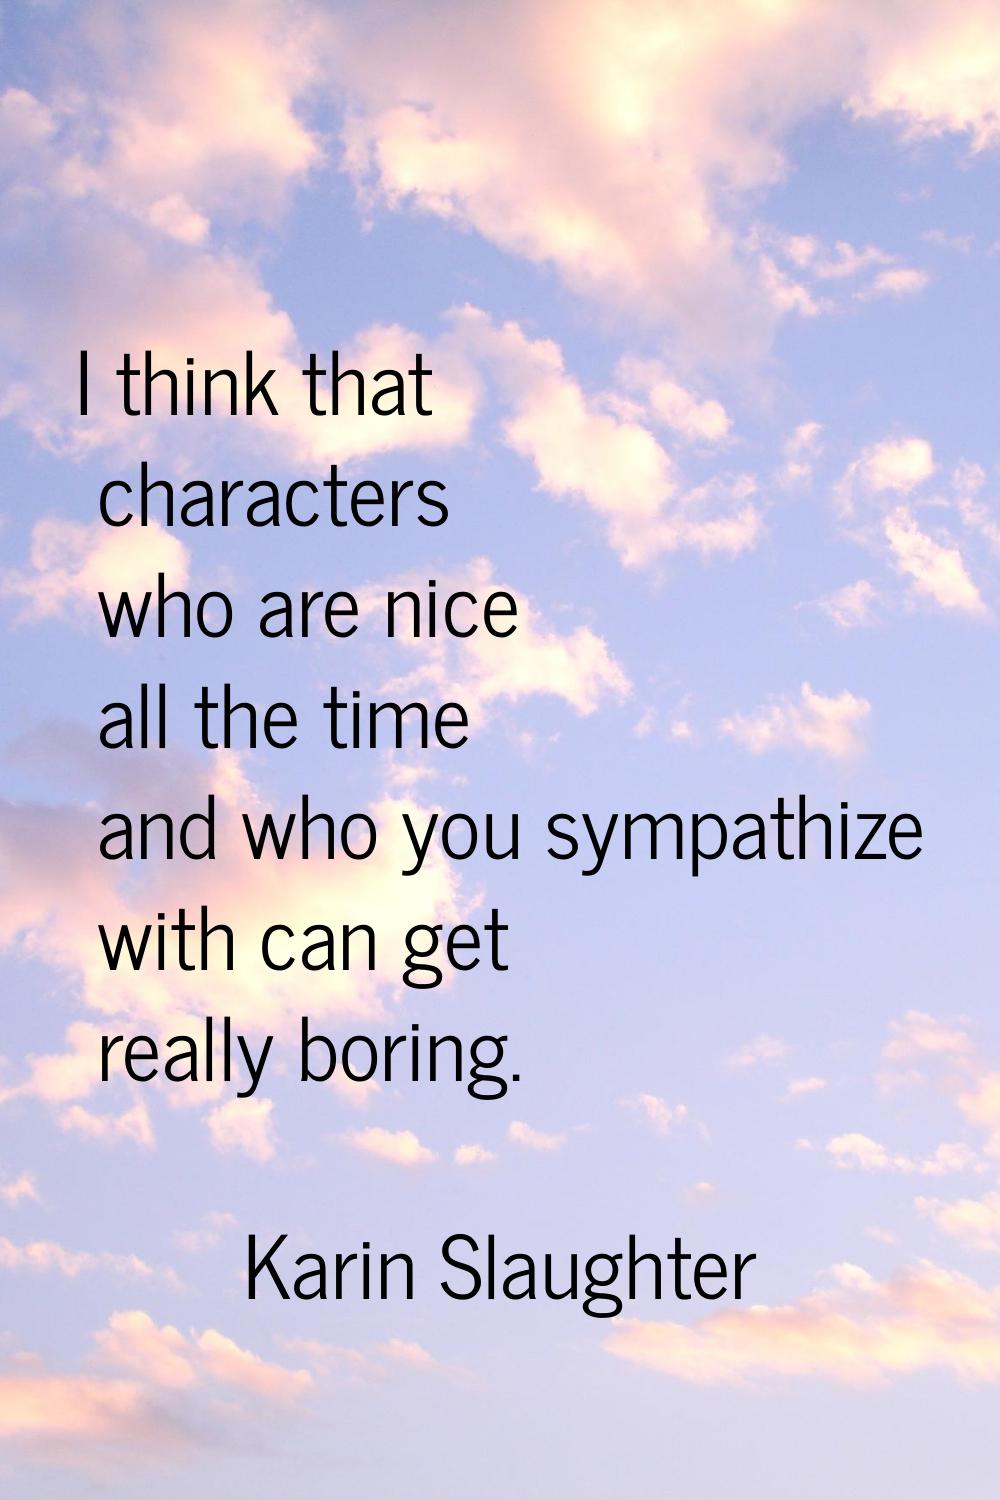 I think that characters who are nice all the time and who you sympathize with can get really boring